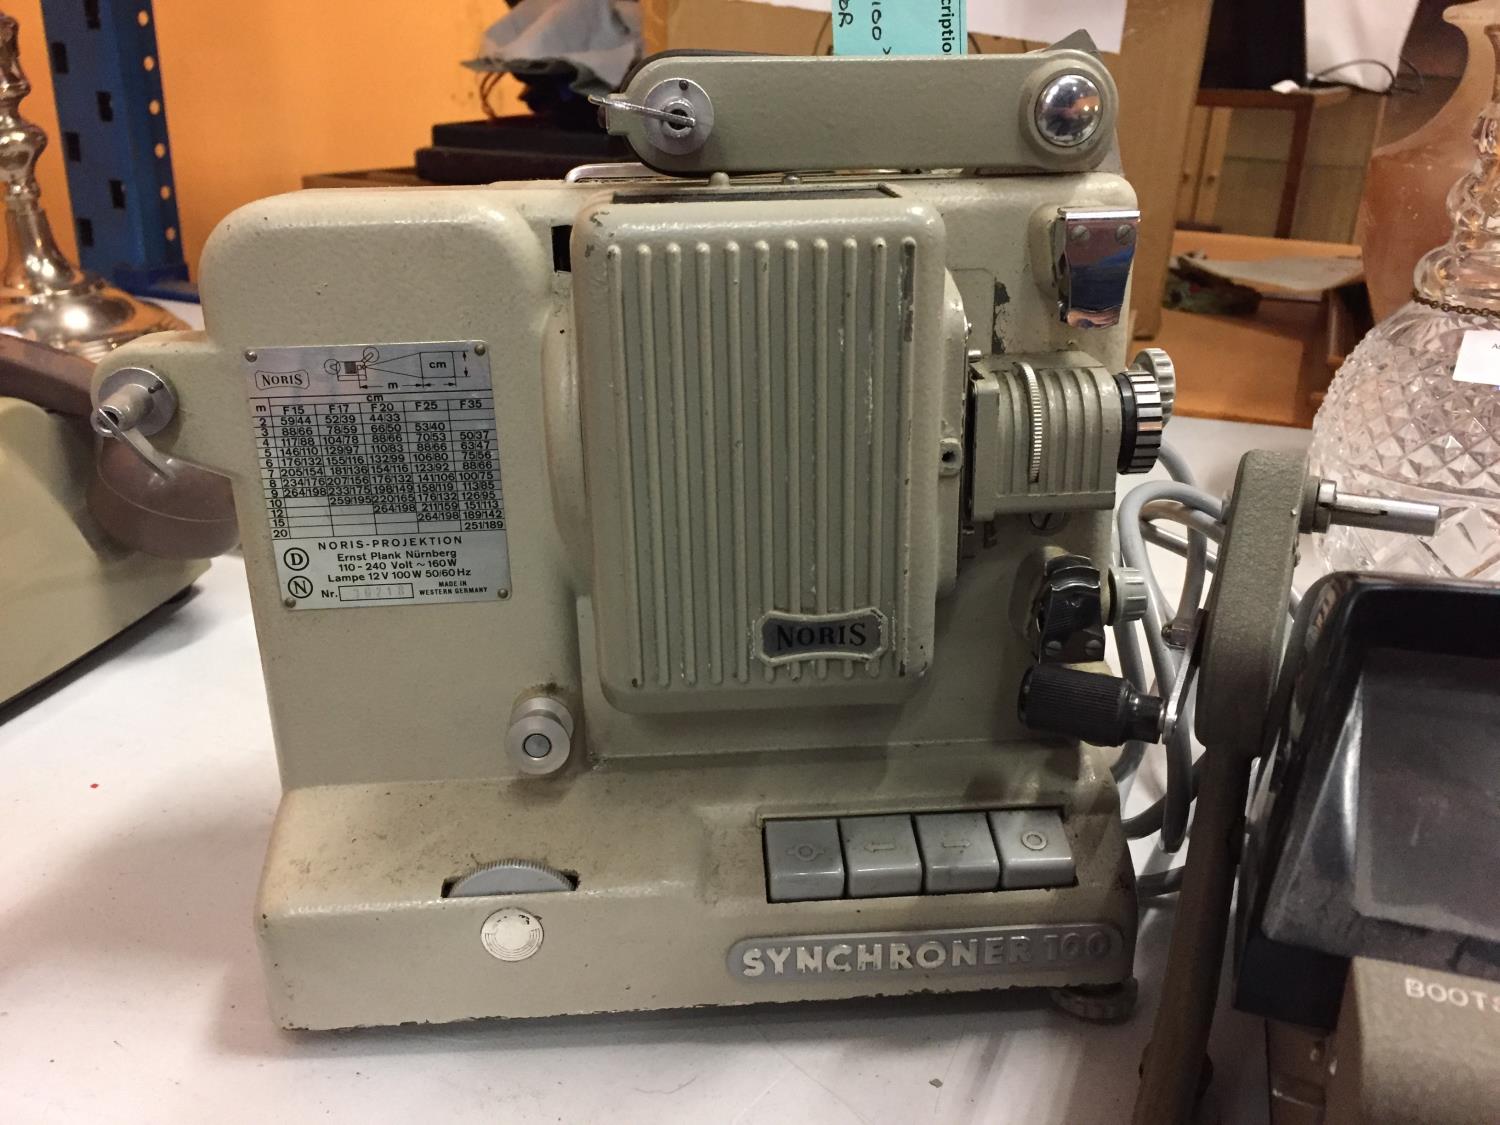 A NORRIS 8MM SYCHRONER 100 PROJECTOR AND FURTHER BOOTS CINE EDITOR - Image 2 of 4